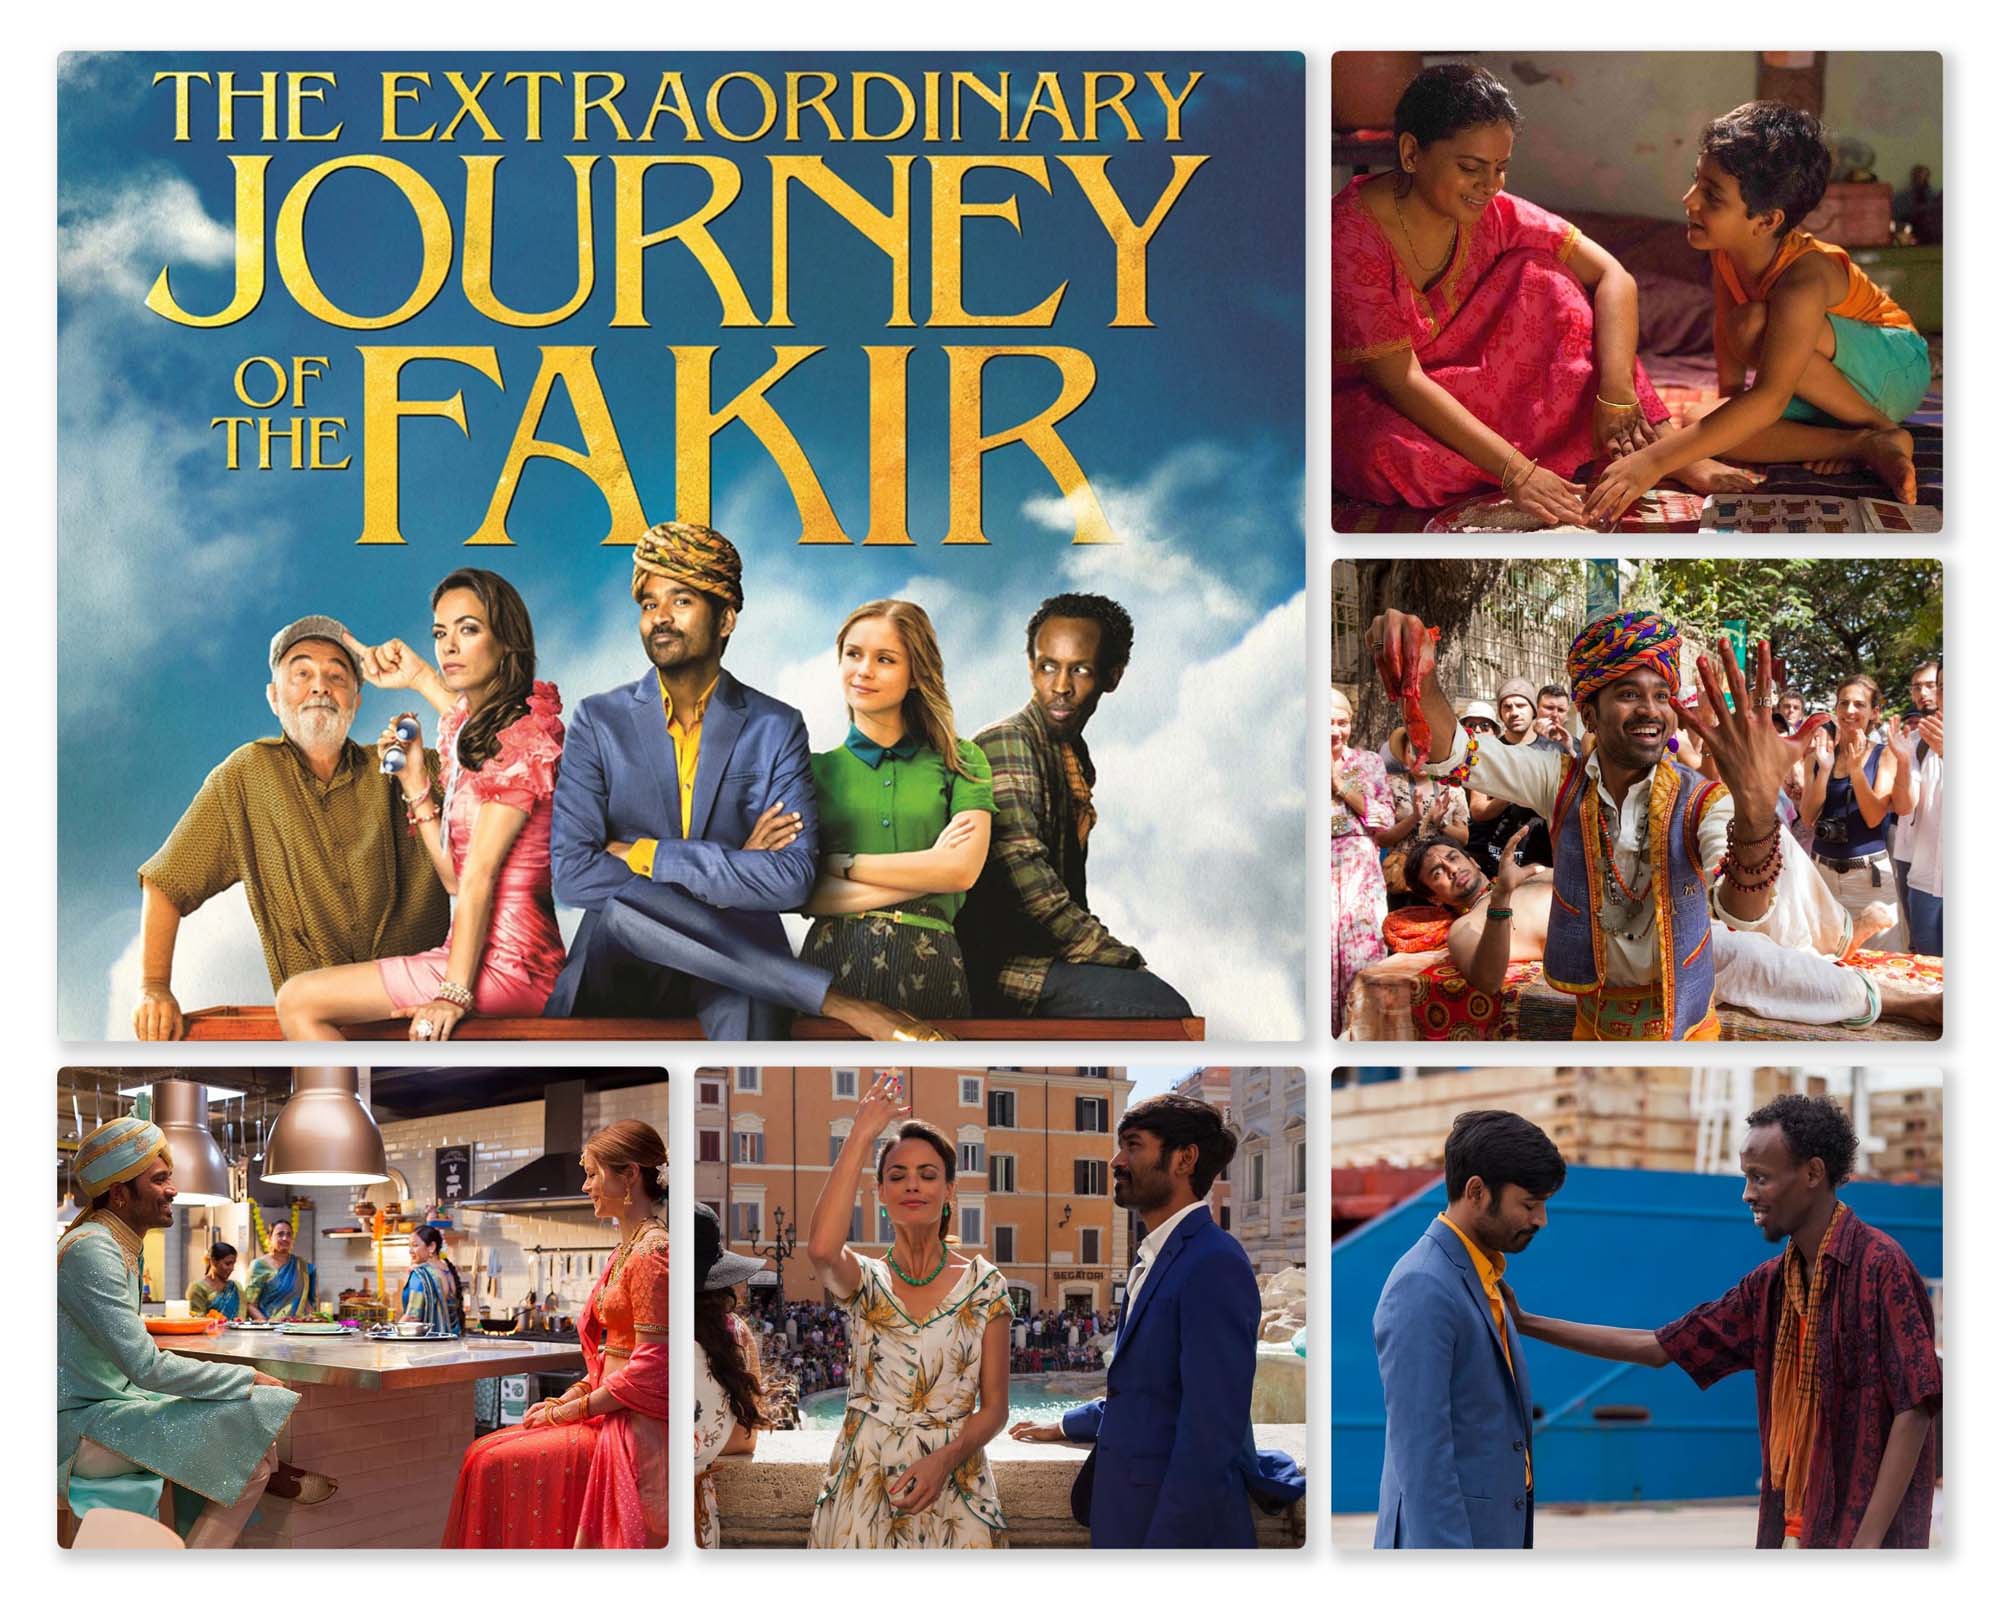 The Extraordinary Journey of the Fakir (2019) - Dhanush, Bérénice Bejo, Erin Moriarty. Directed by Ken Scott.